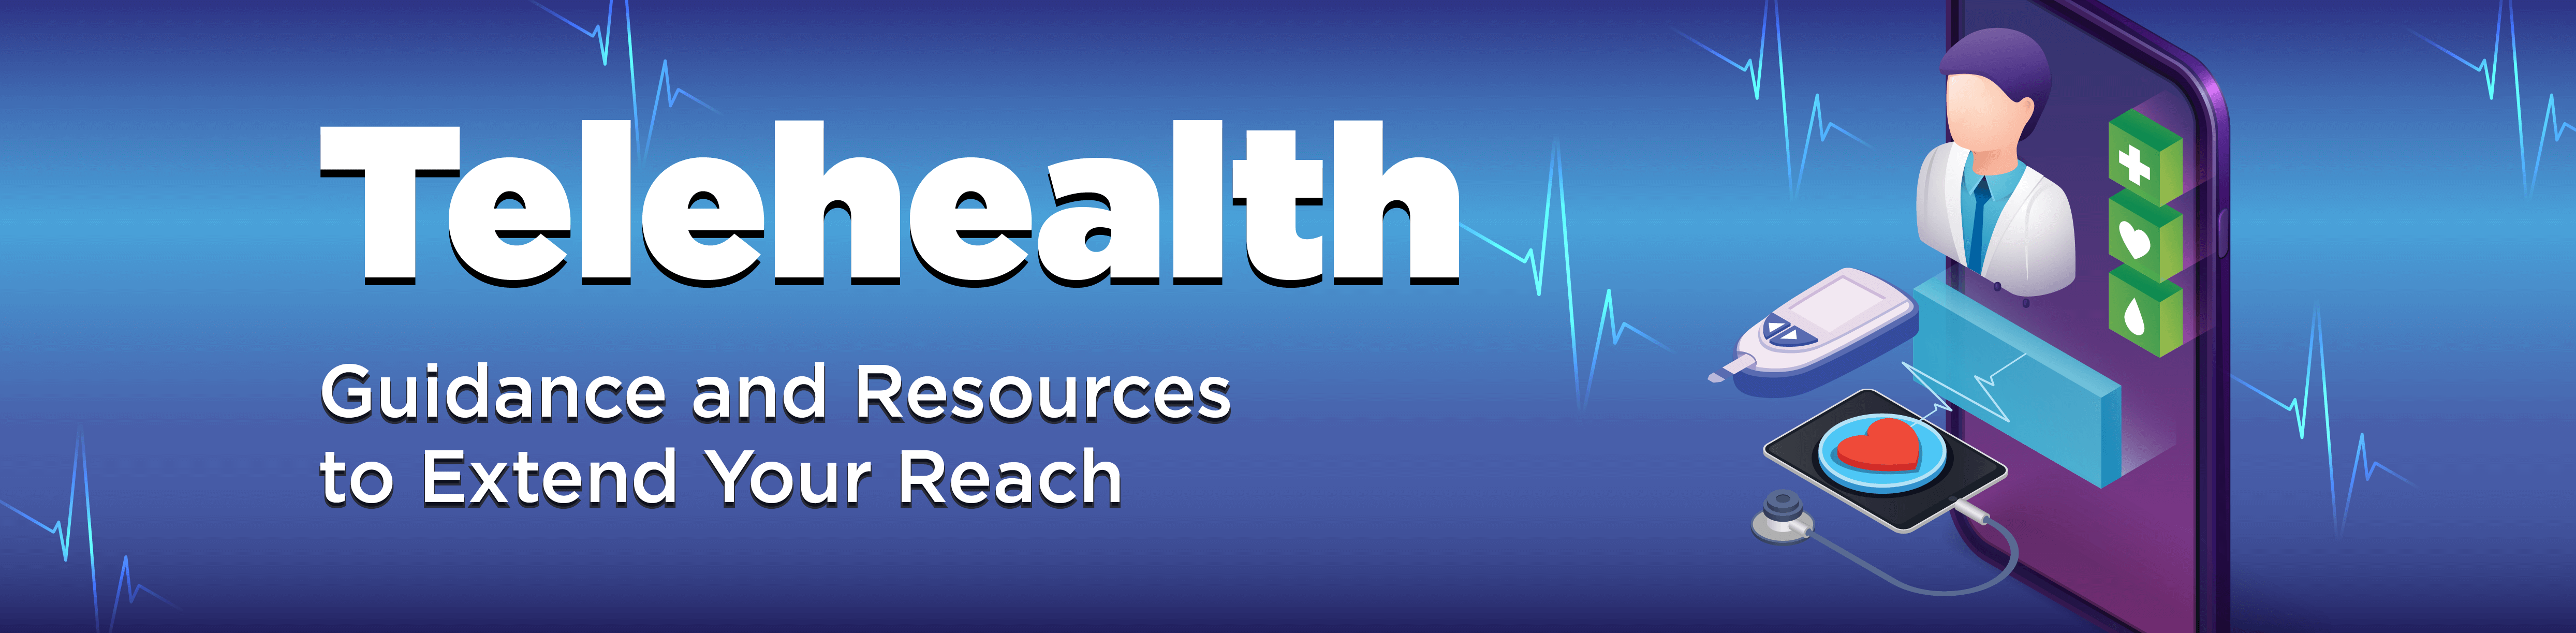 Telehealth: Guidance and Resources to Extend Your Reach